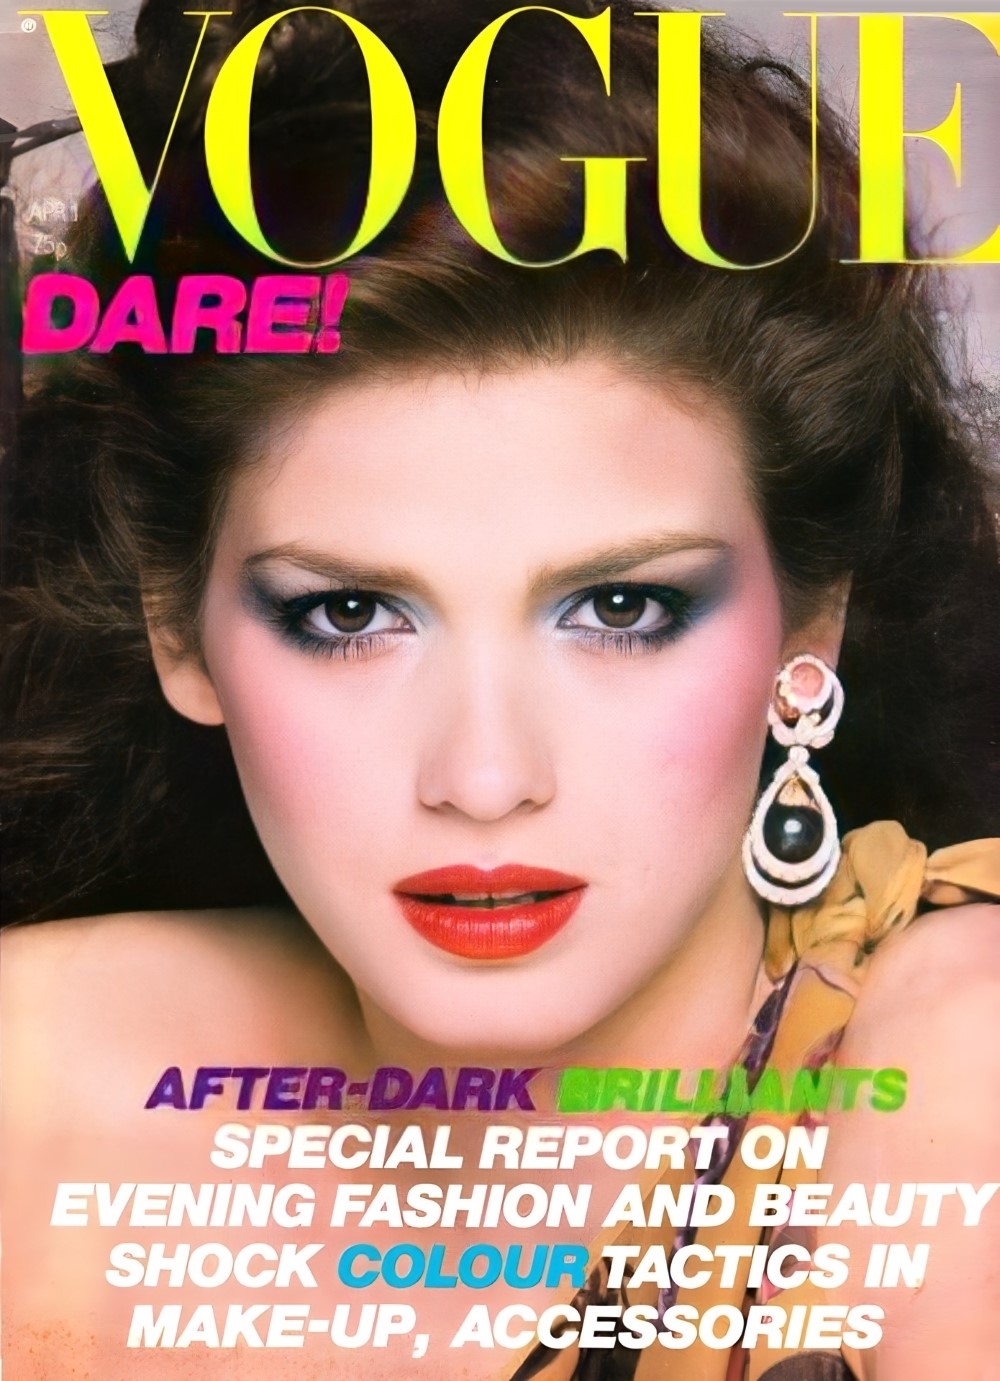 Gia Carangi on the cover of Vogue UK April 1, 1979. Photographer Alex Chatelain. Hairstylist Gilles. Makeup artist Jacques Clemente.